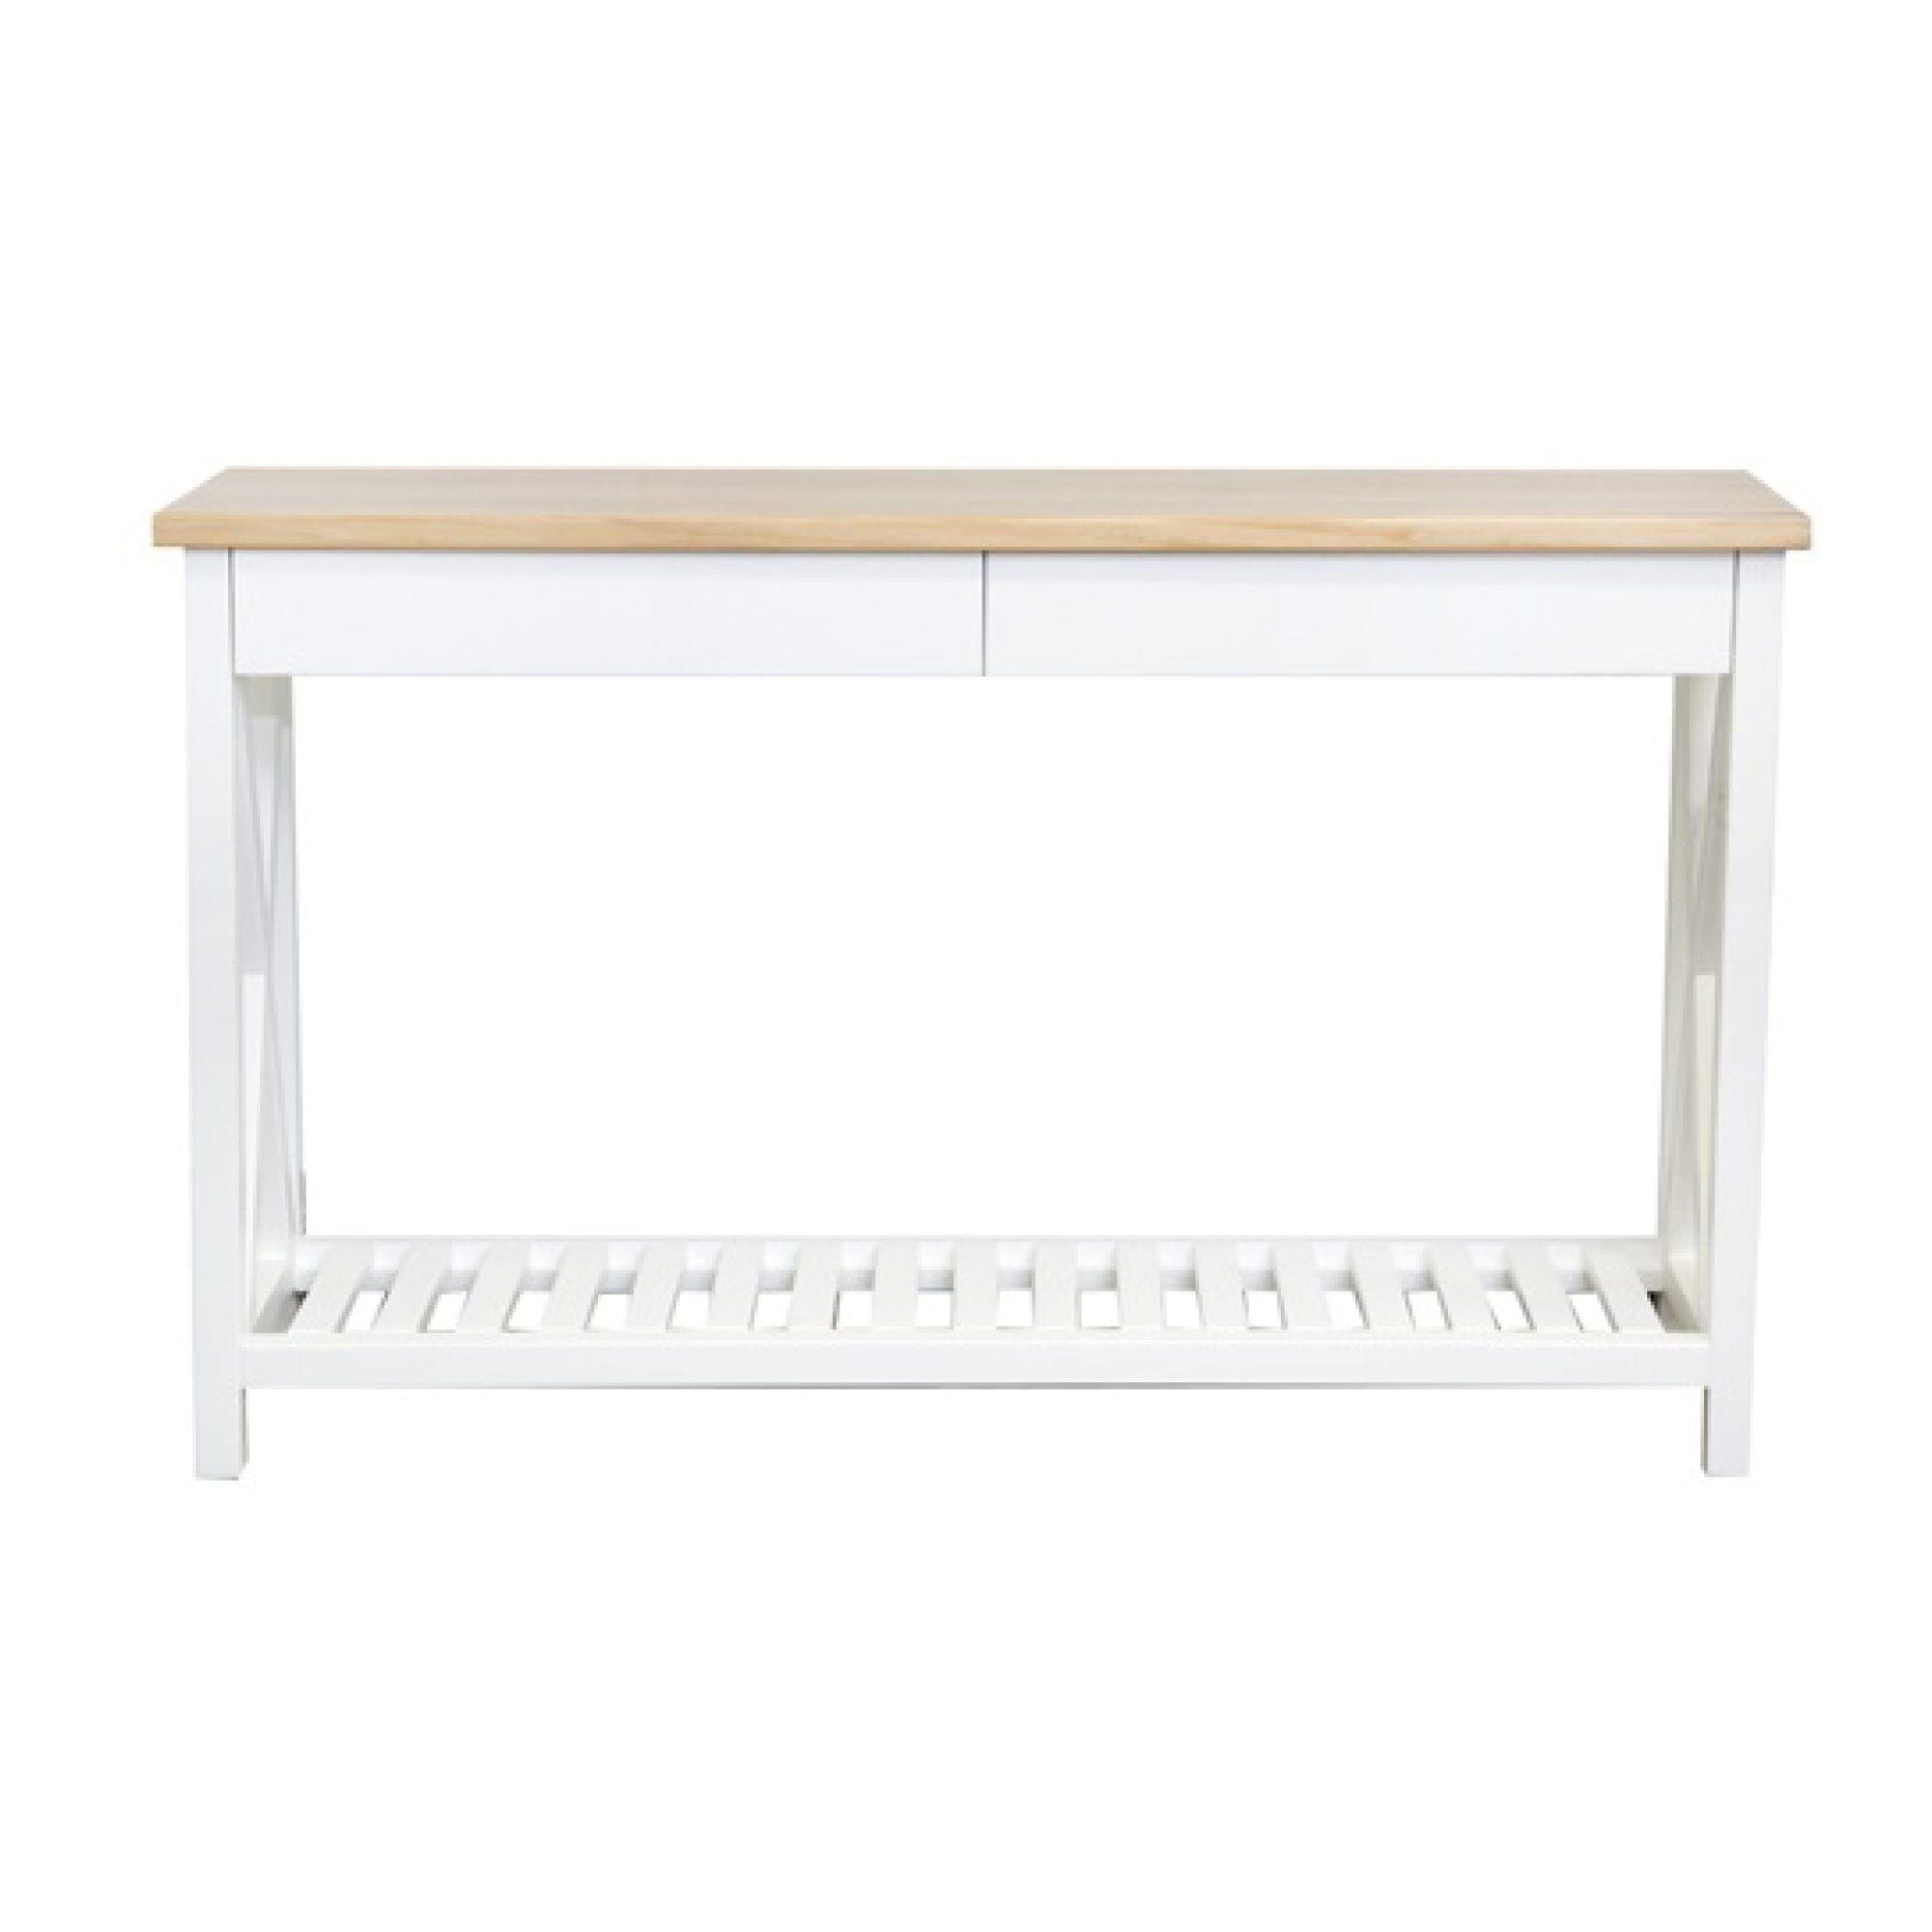 Caribbean Console &amp; Drawers L1400mm Living Furniture Beachwood Designs White &amp; Limed Ash 